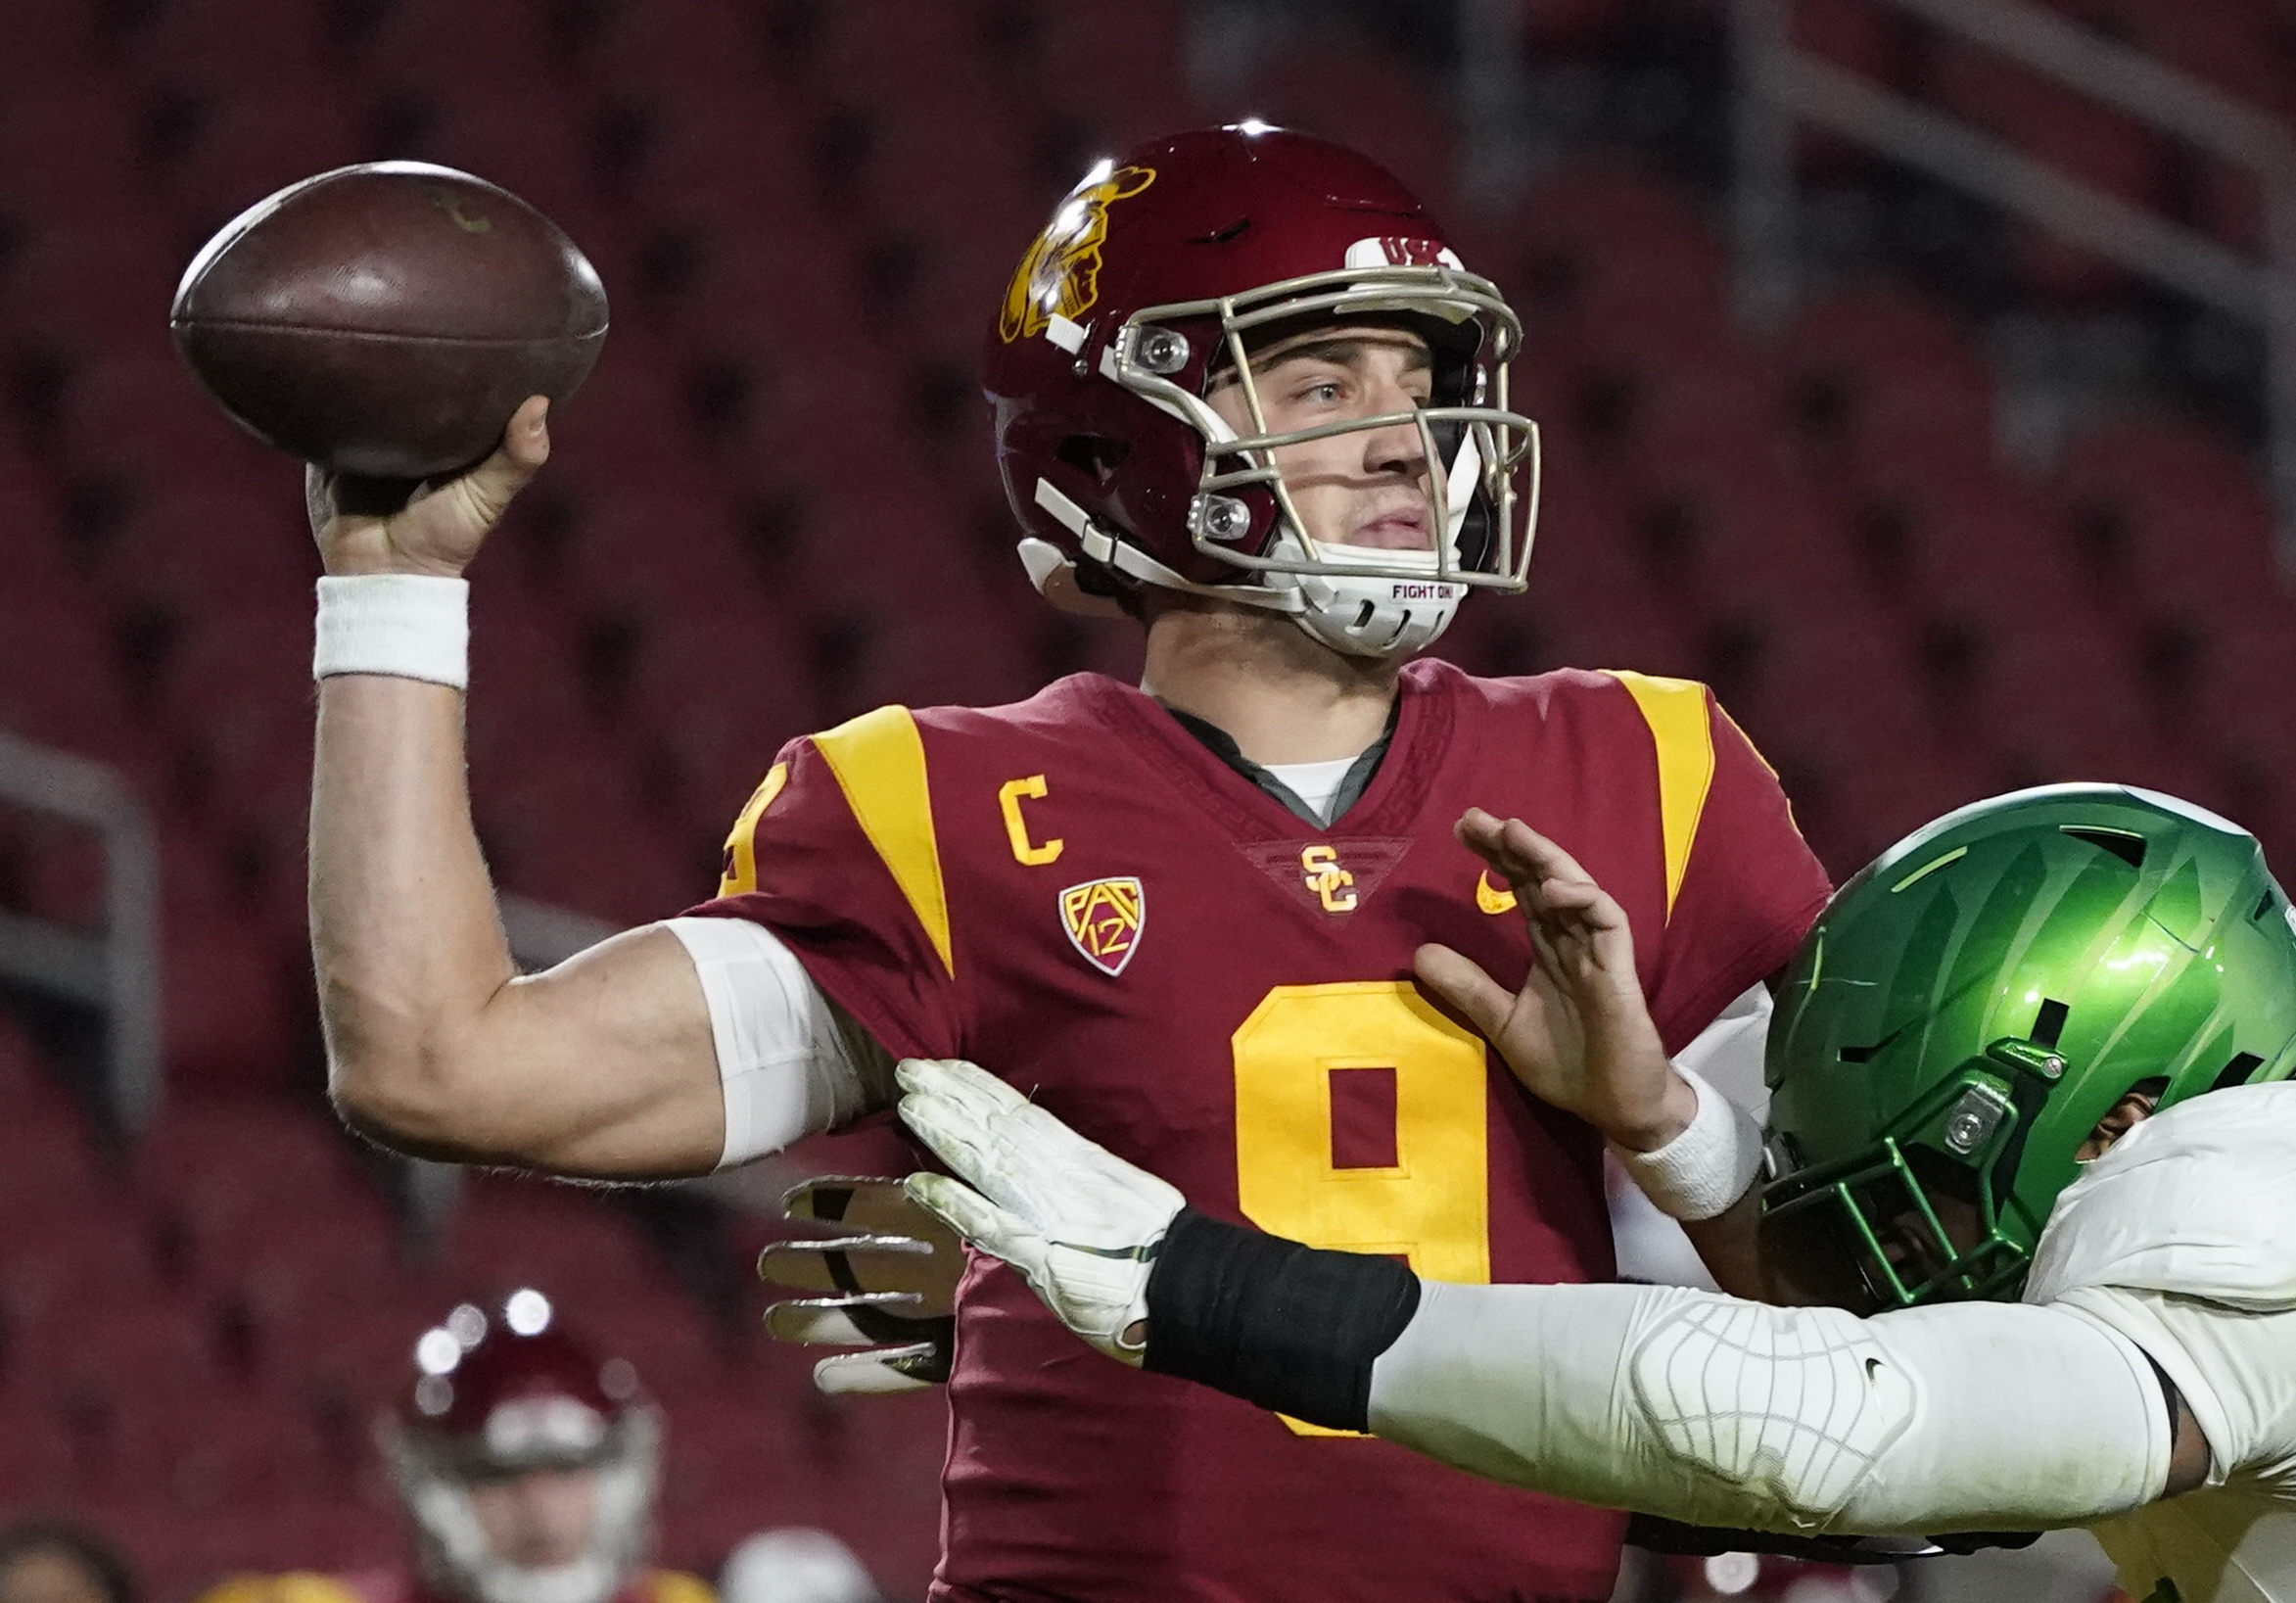 Is it too early to look ahead to 2022 NFL Draft quarterbacks? - Page 2